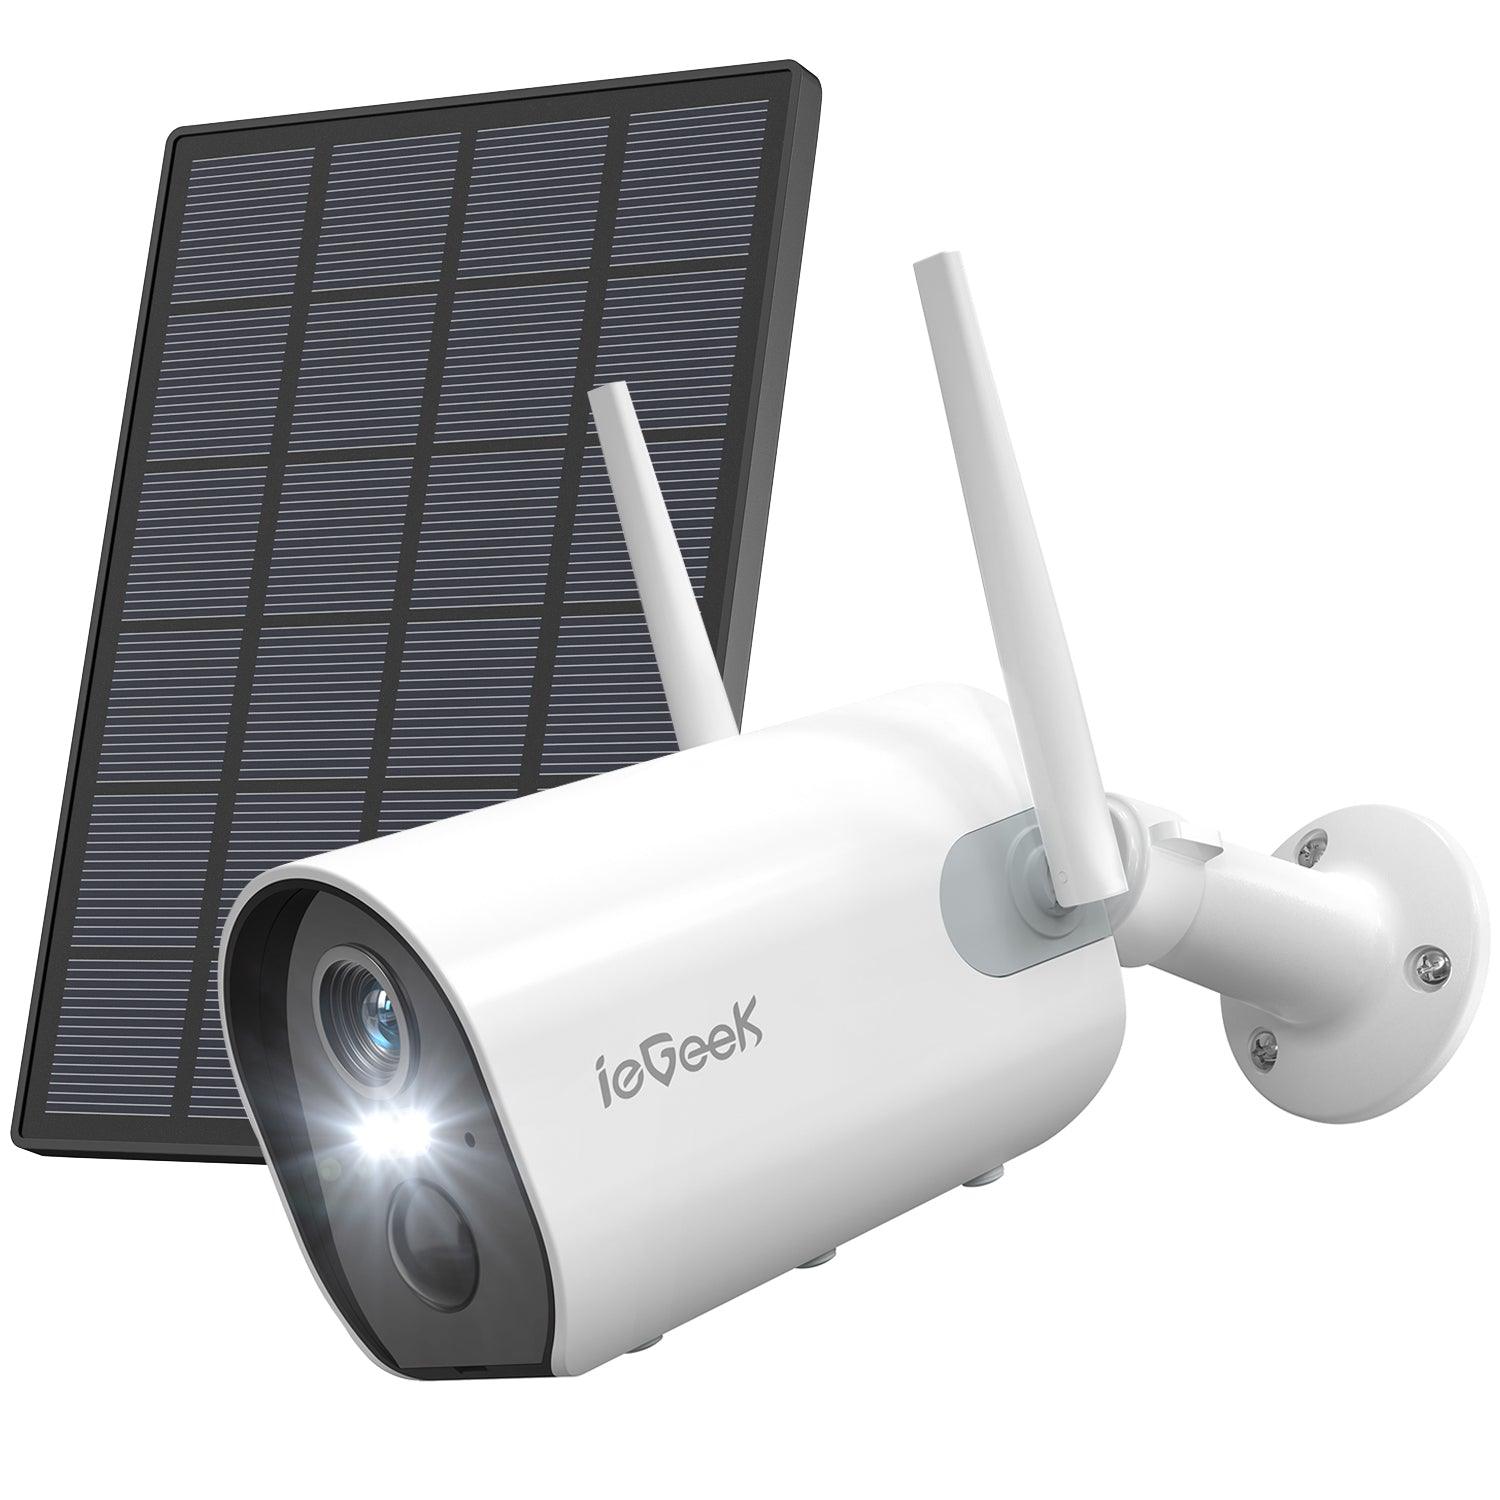 ieGeek Security Cameras Wireless Outdoor - 2 Pack 2K WiFi Solar Camera  System with 360°PTZ